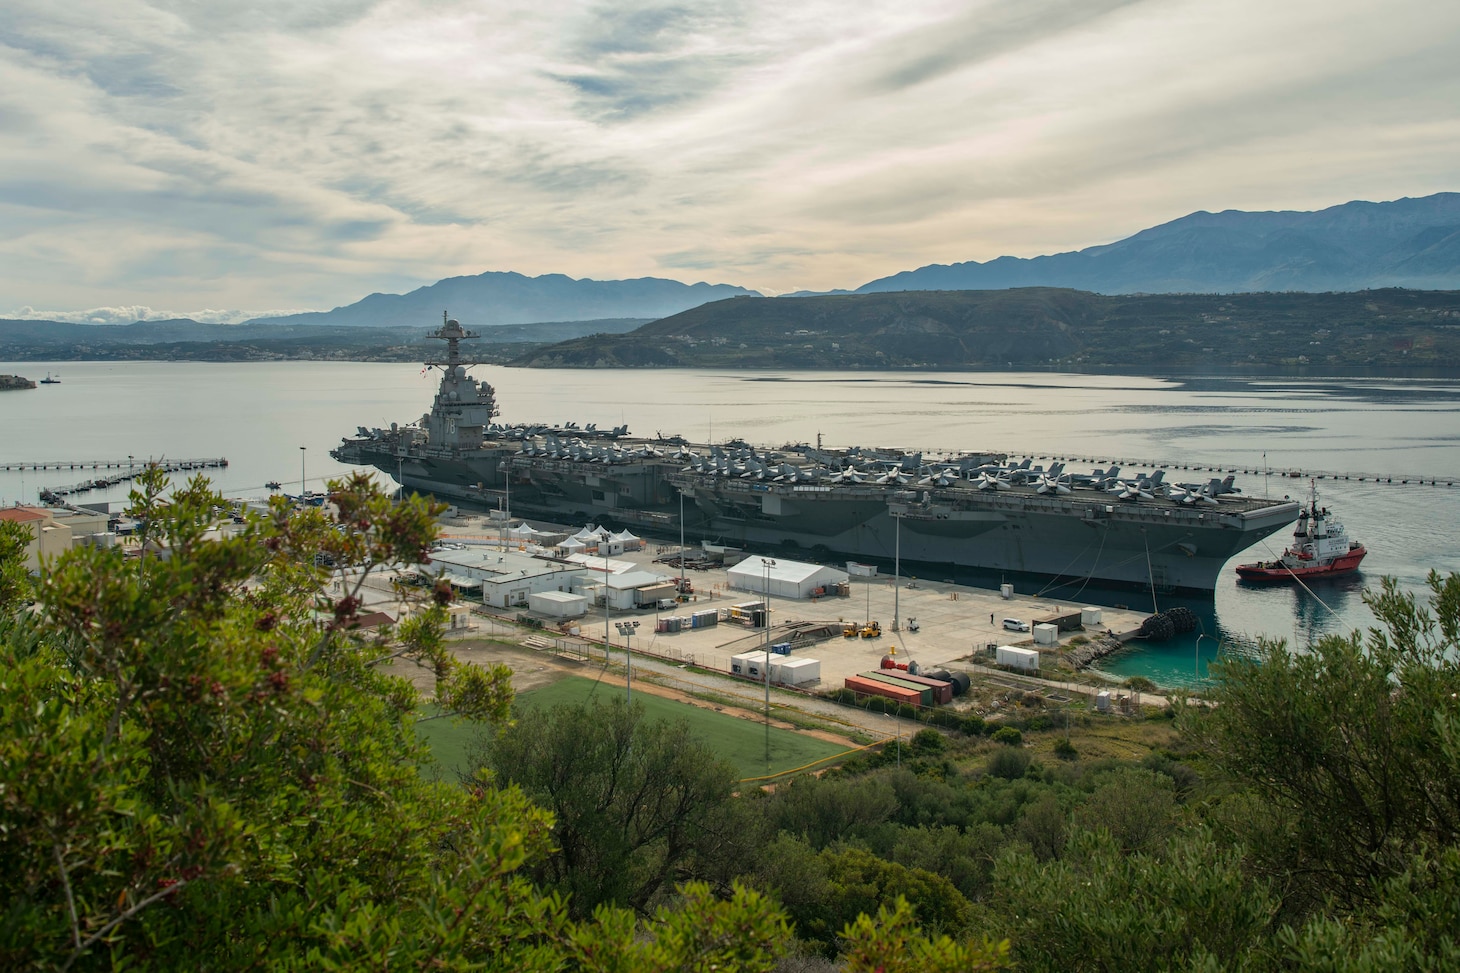 The first-in-class aircraft carrier USS Gerald R. Ford (CVN 78) arrives in Souda Bay, Crete, for a scheduled port visit on Dec. 2, 2023. USS Gerald R. Ford Carrier Strike Group is on a scheduled deployment in the U.S. Naval Forces Europe-Africa area of operations, employed by U.S. Sixth Fleet to defend U.S., allied and partner interests. NSA Souda Bay is an operational ashore installation which enables and supports U.S., Allied, Coalition, and Partner nation forces to preserve security and stability in the European, African, and Central Command areas of responsibility. (U.S. Navy photo by Mass Communication Specialist 1st Class Delaney S. Jensen)